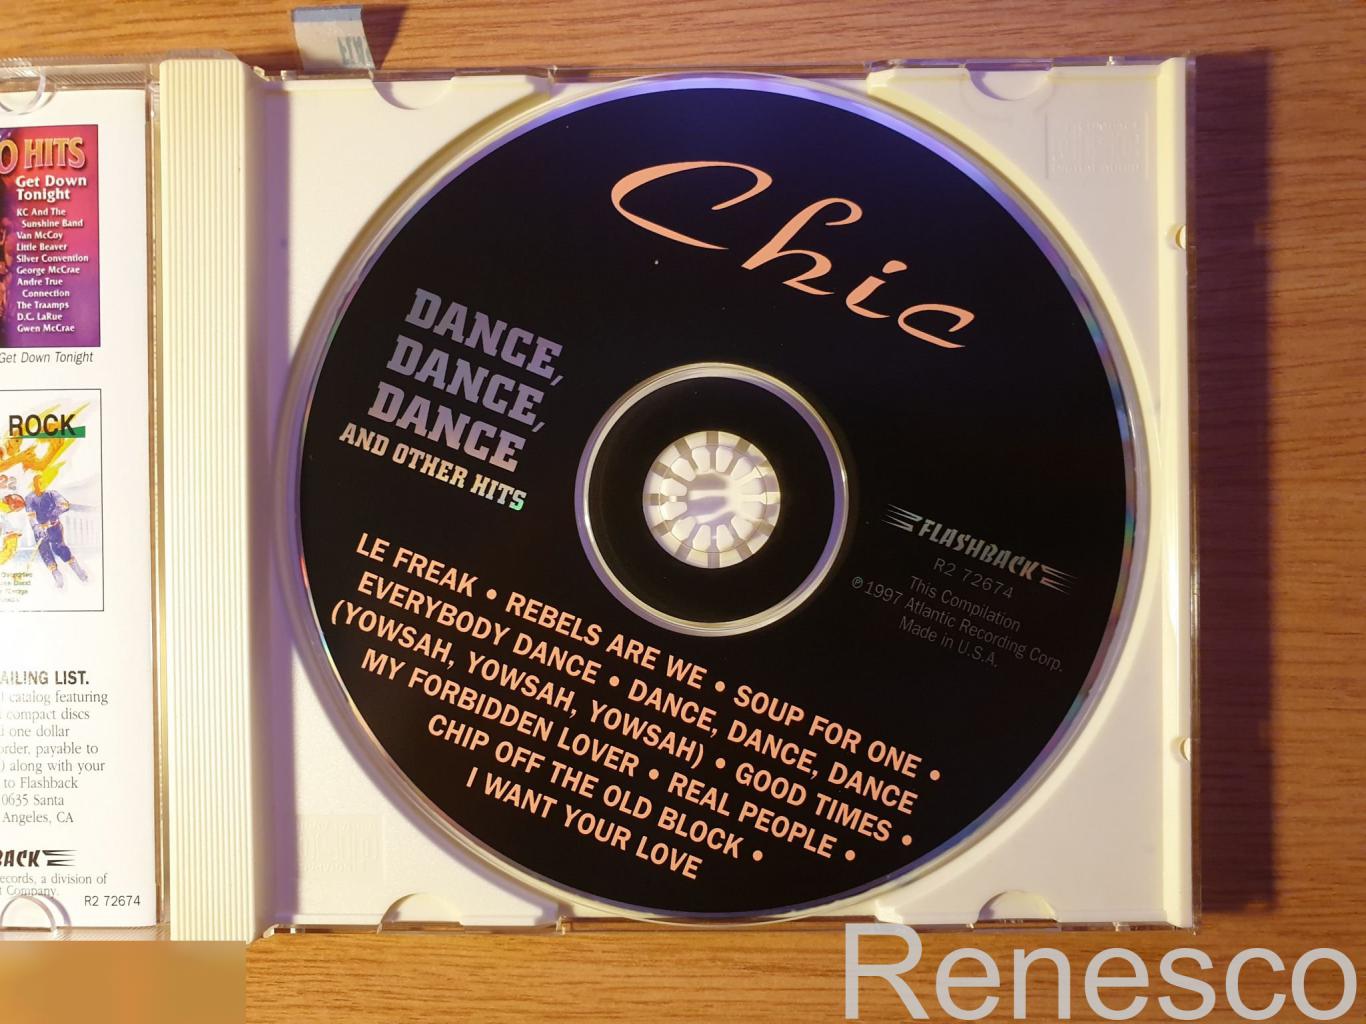 (CD) Chic ?– Dance, Dance, Dance, And Other Hits (1997) (USA) 4